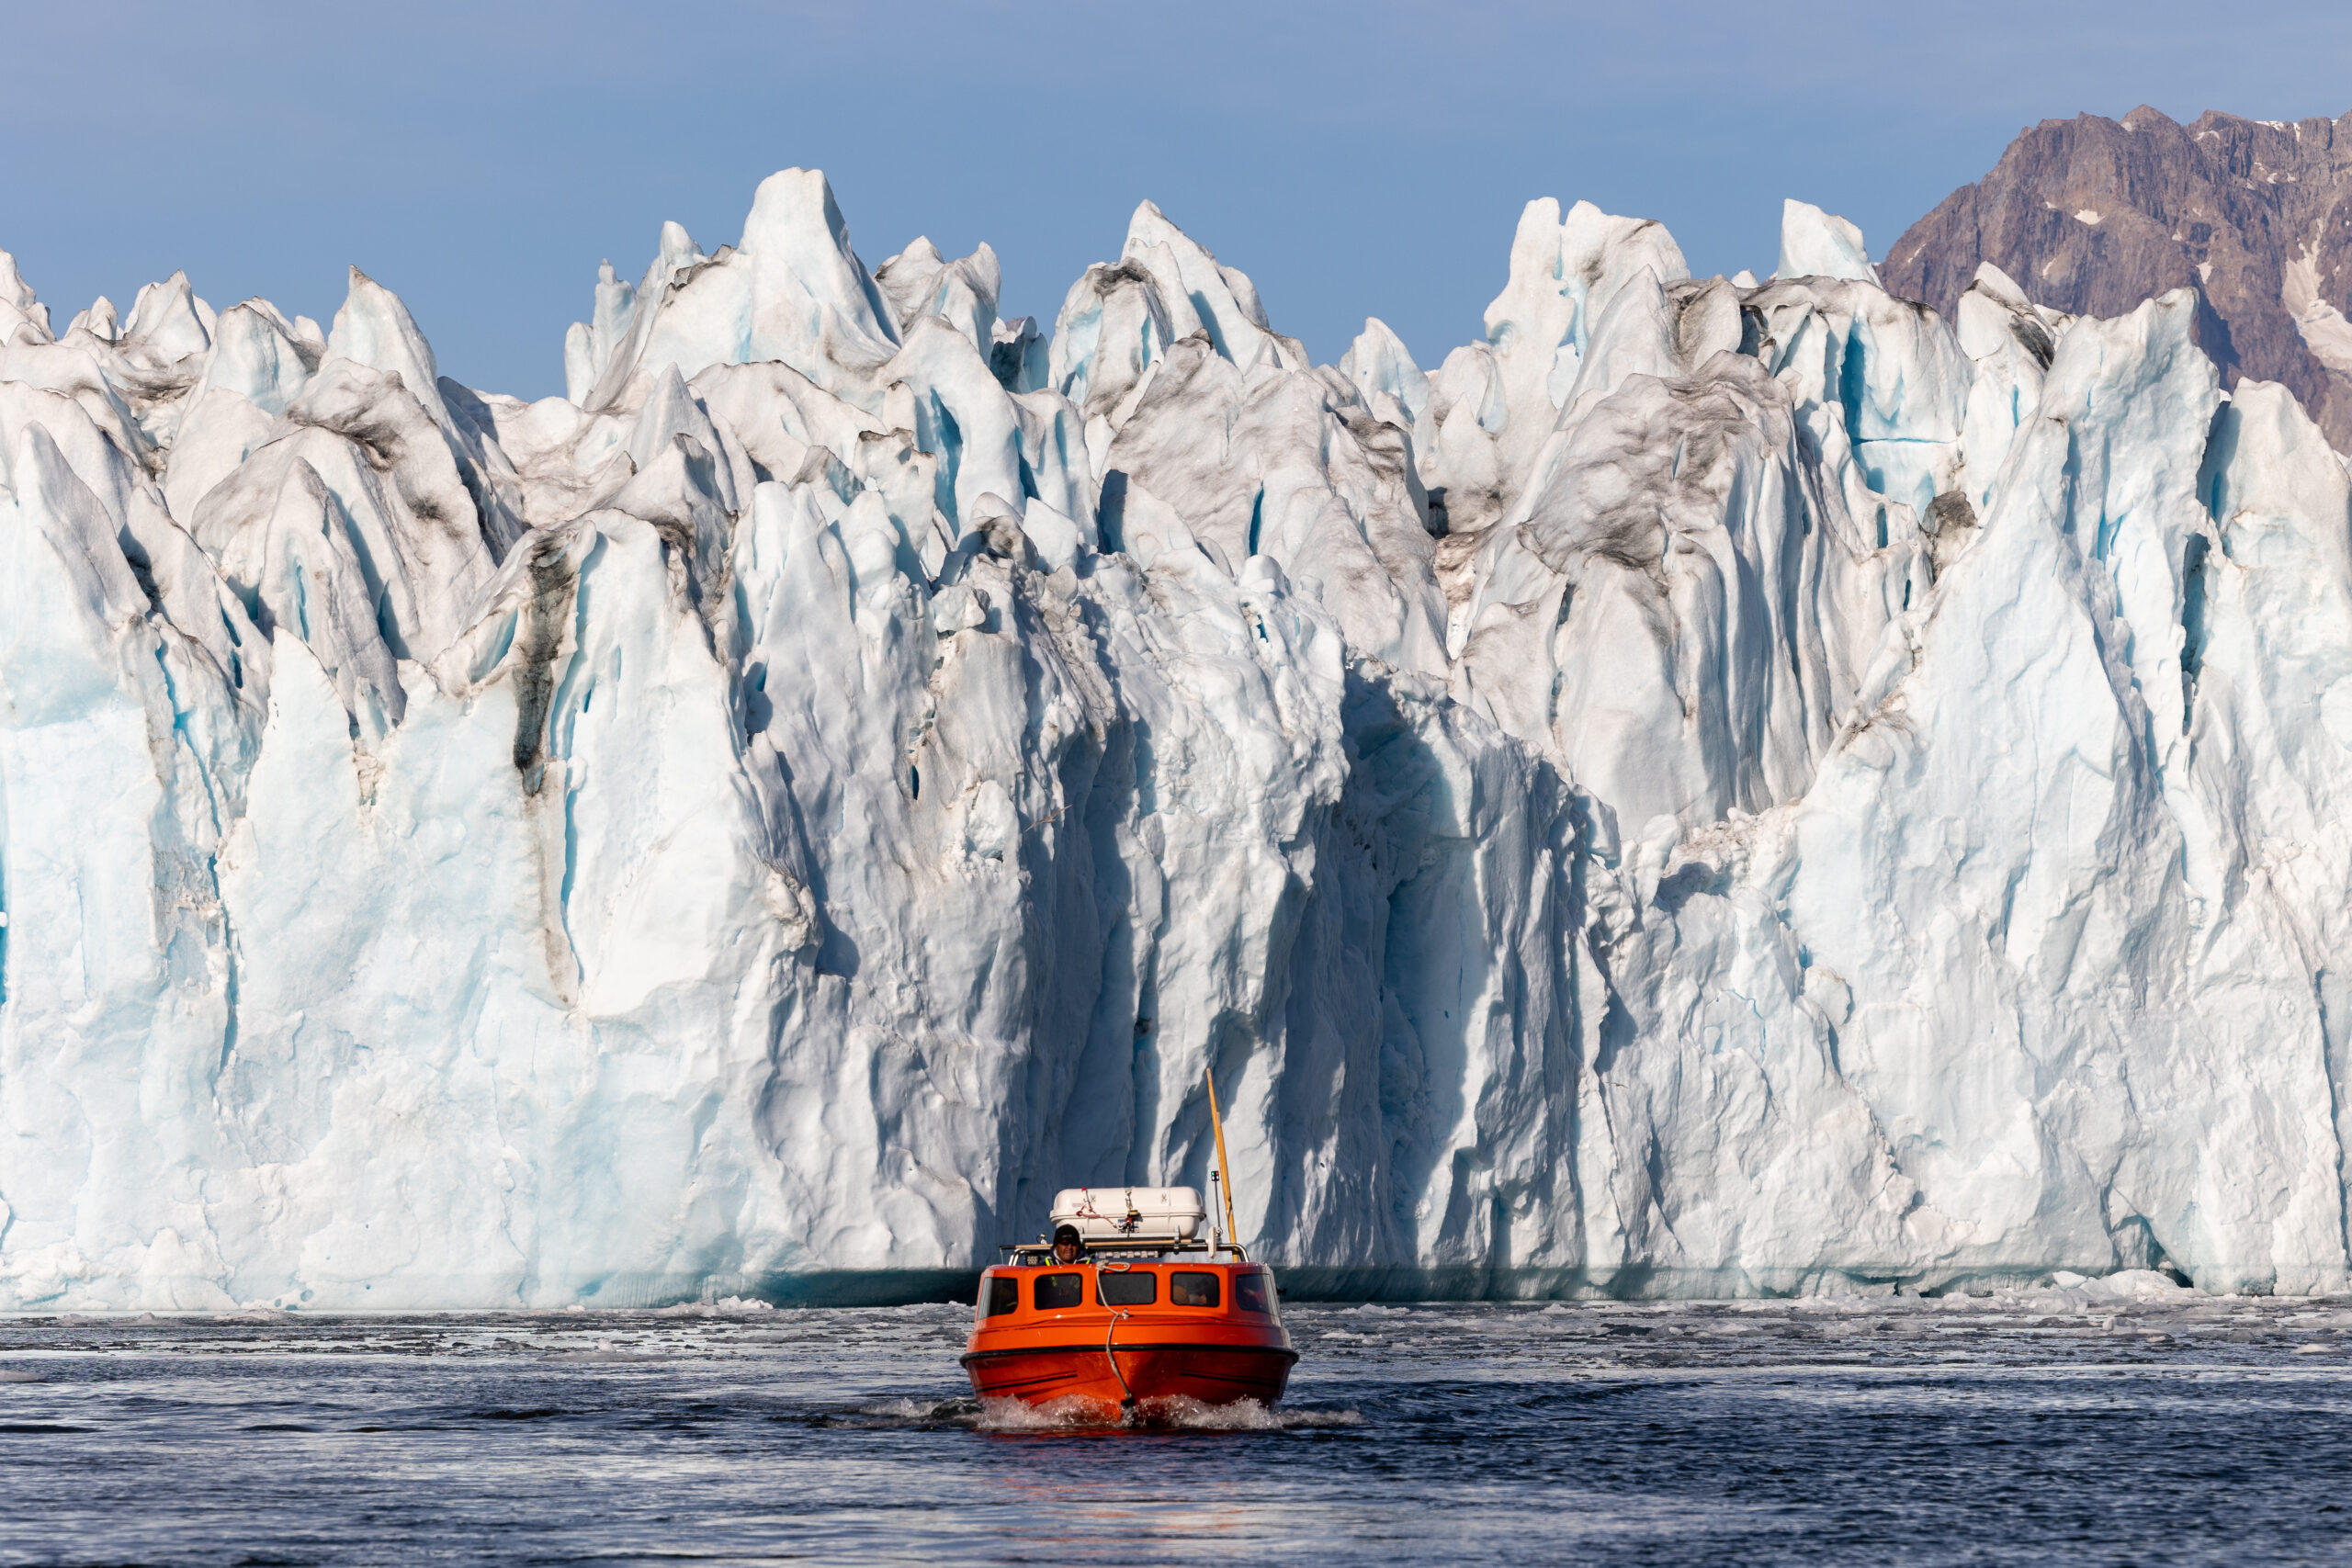 Iconic poca boat in front of Knud Rasmussen Glacier. Photo by Anna & Lucas Jahn - Visit East Greenland